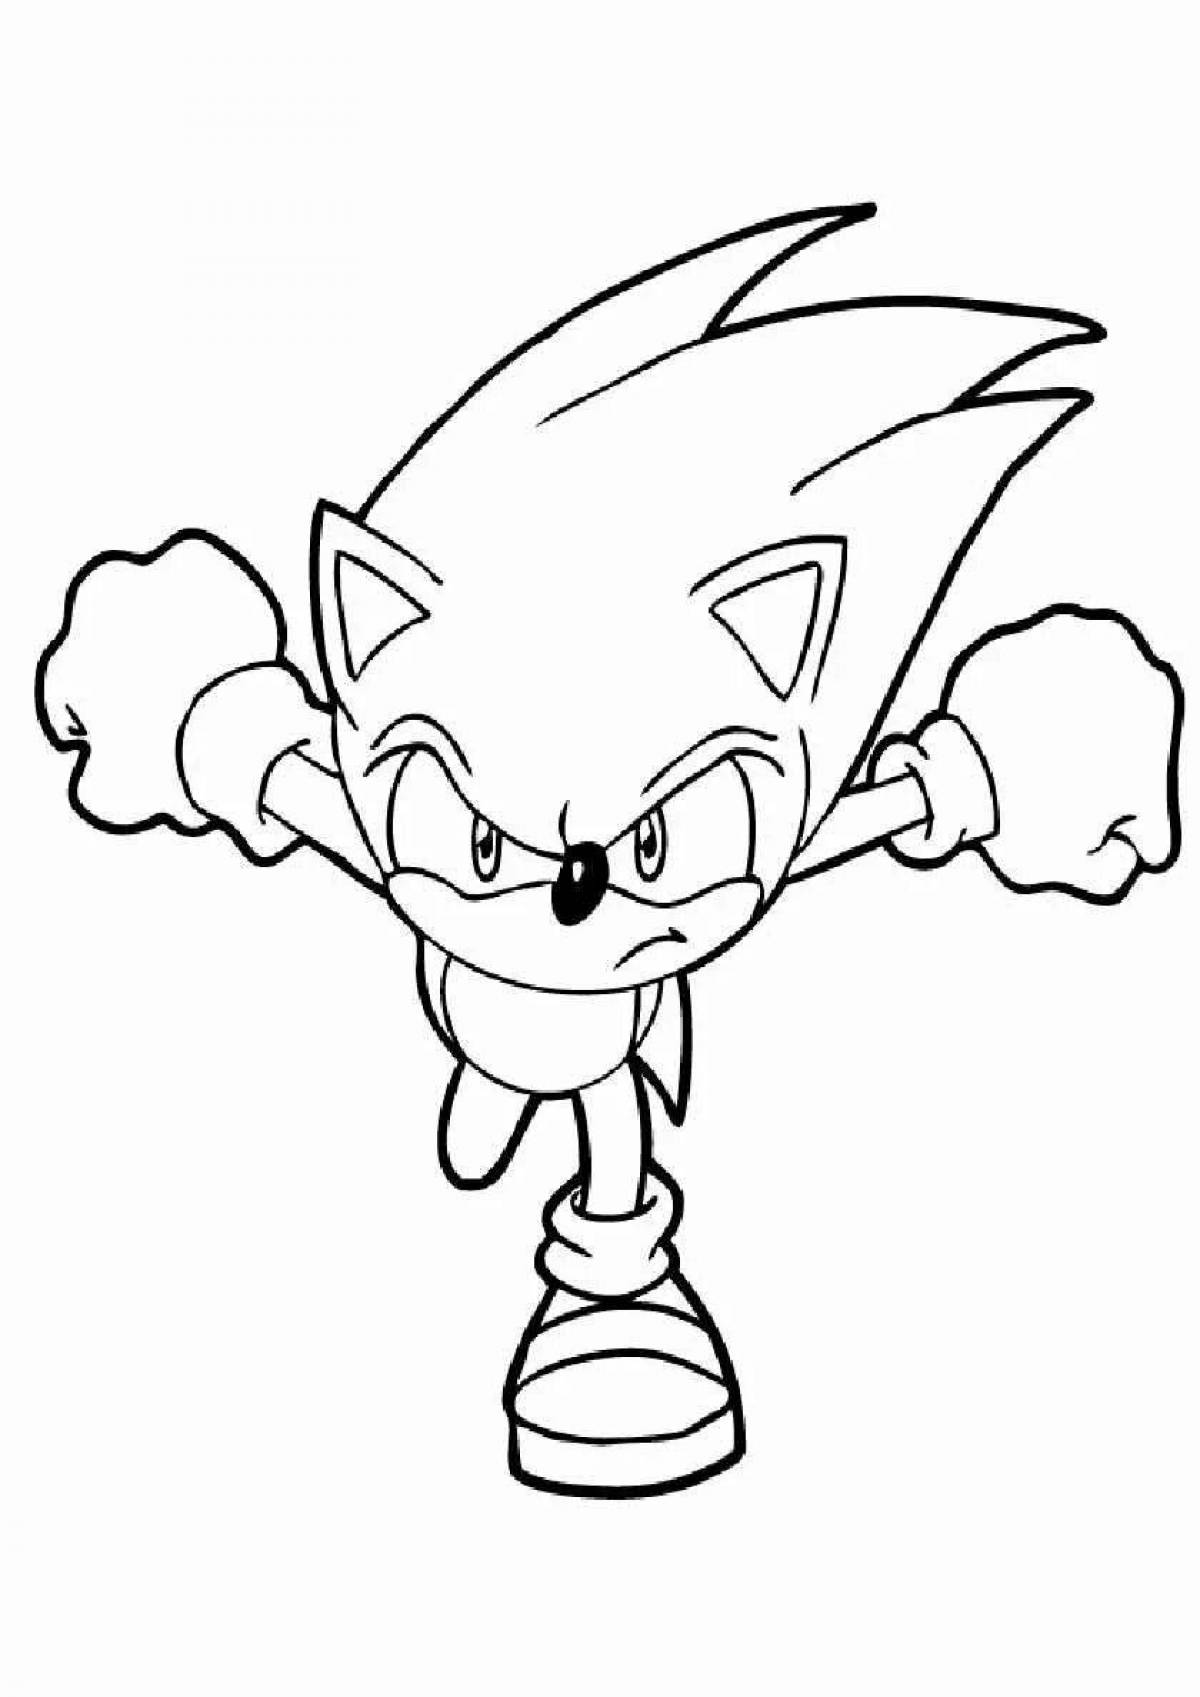 Exquisite sonic igze coloring book